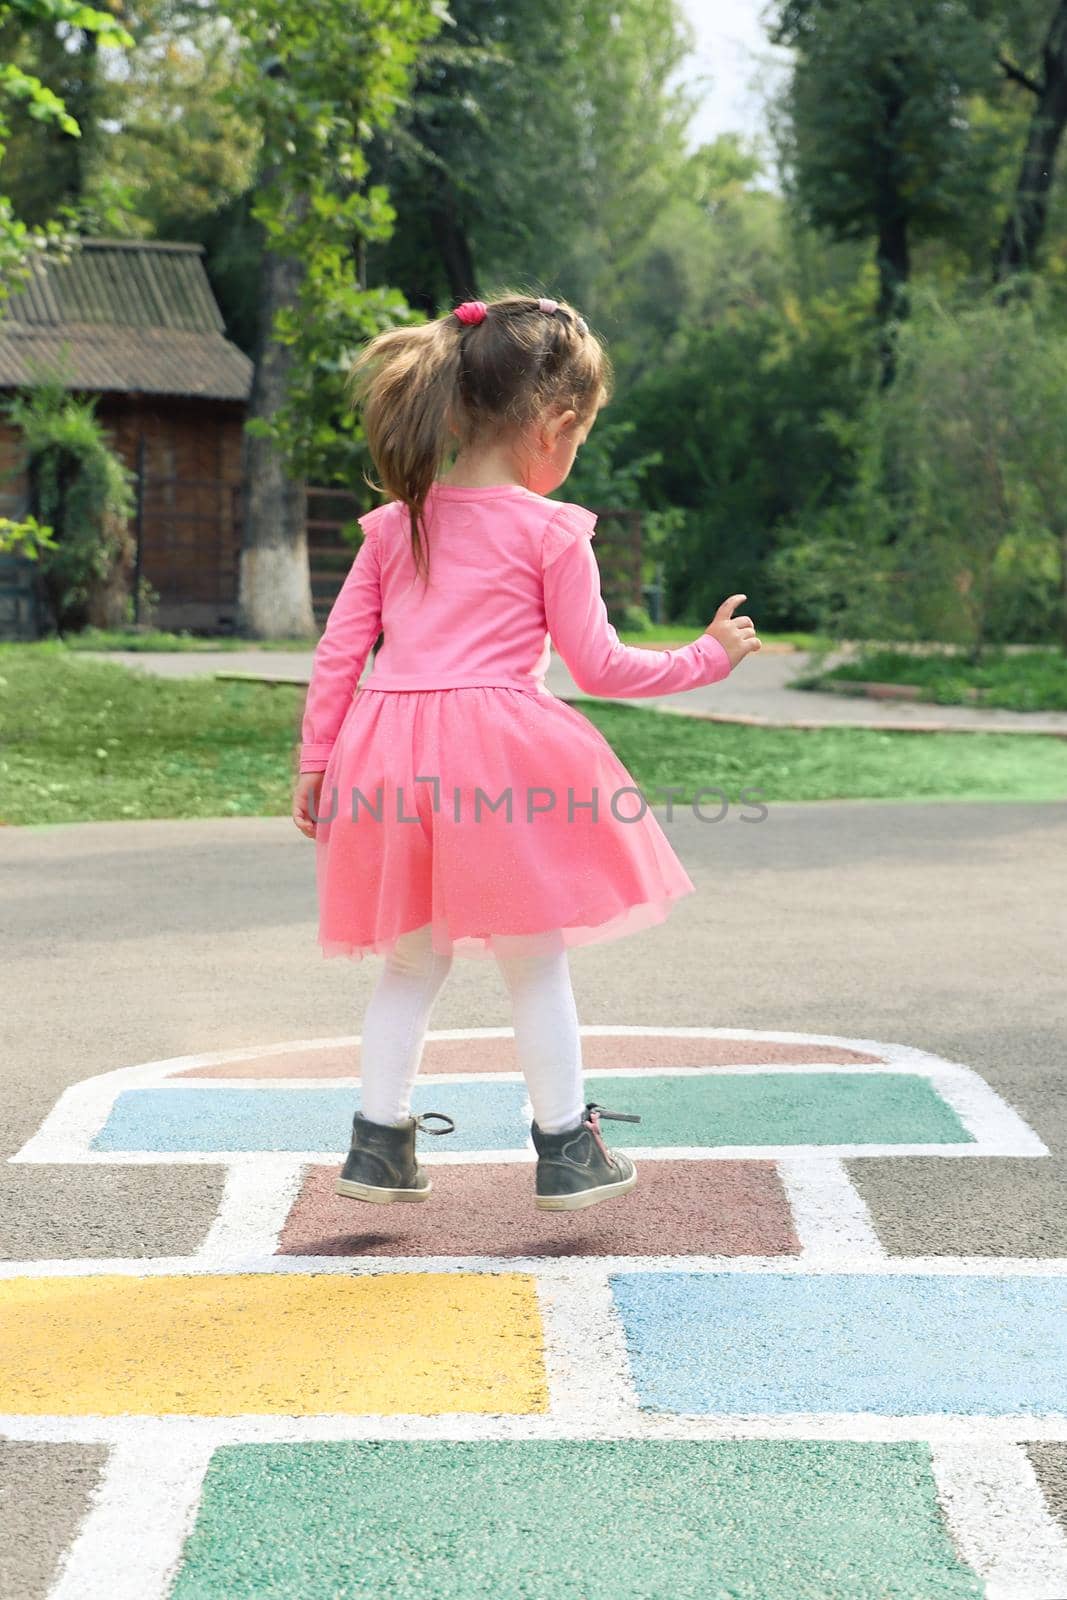 Little girl in a pink dress plays hopscotch on the street. by Rom4ek